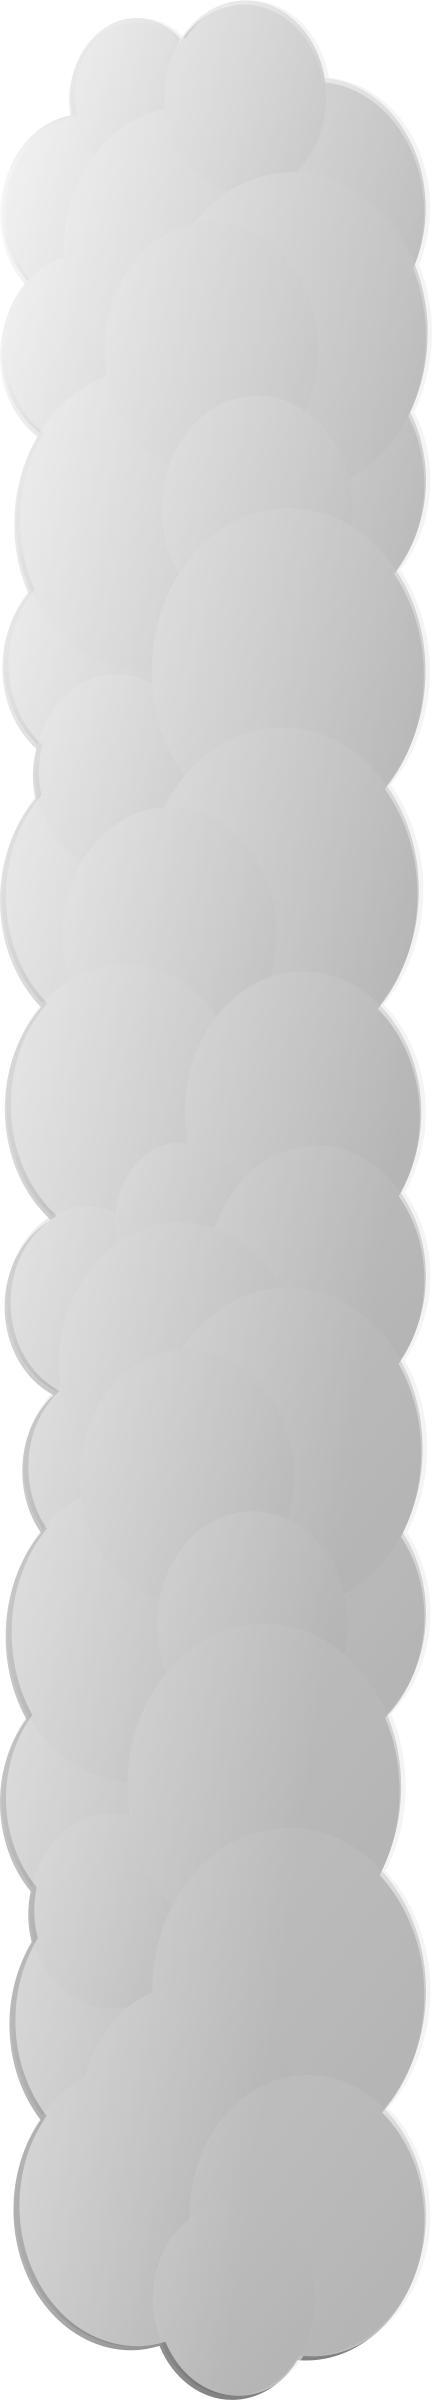 Clouds png